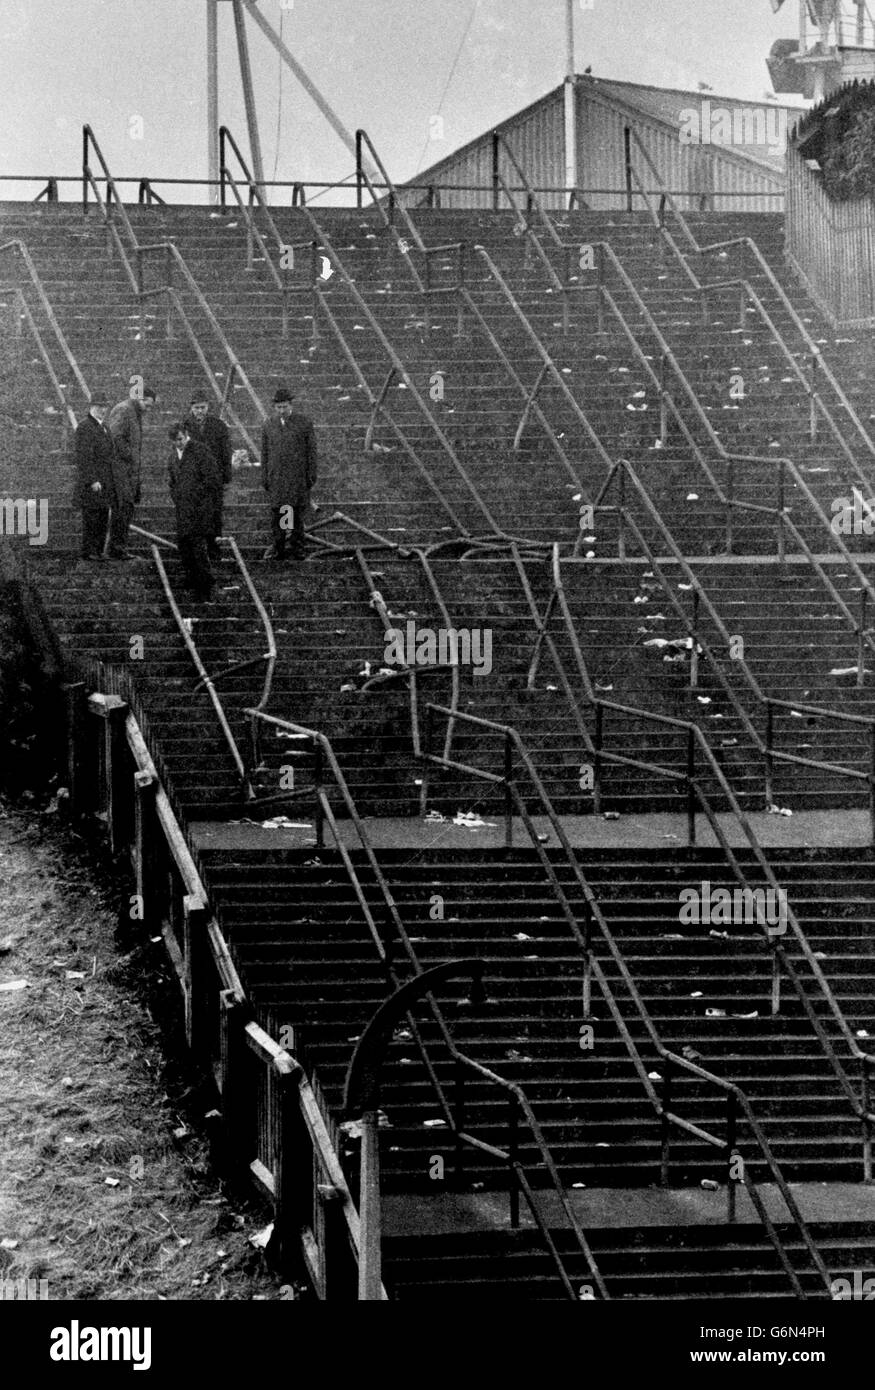 The crushed barriers at Ibrox Stadium in Glasgow, where 66 people died after the crowd disaster yesterday, which followed the Rangers v Celtic match. Stock Photo